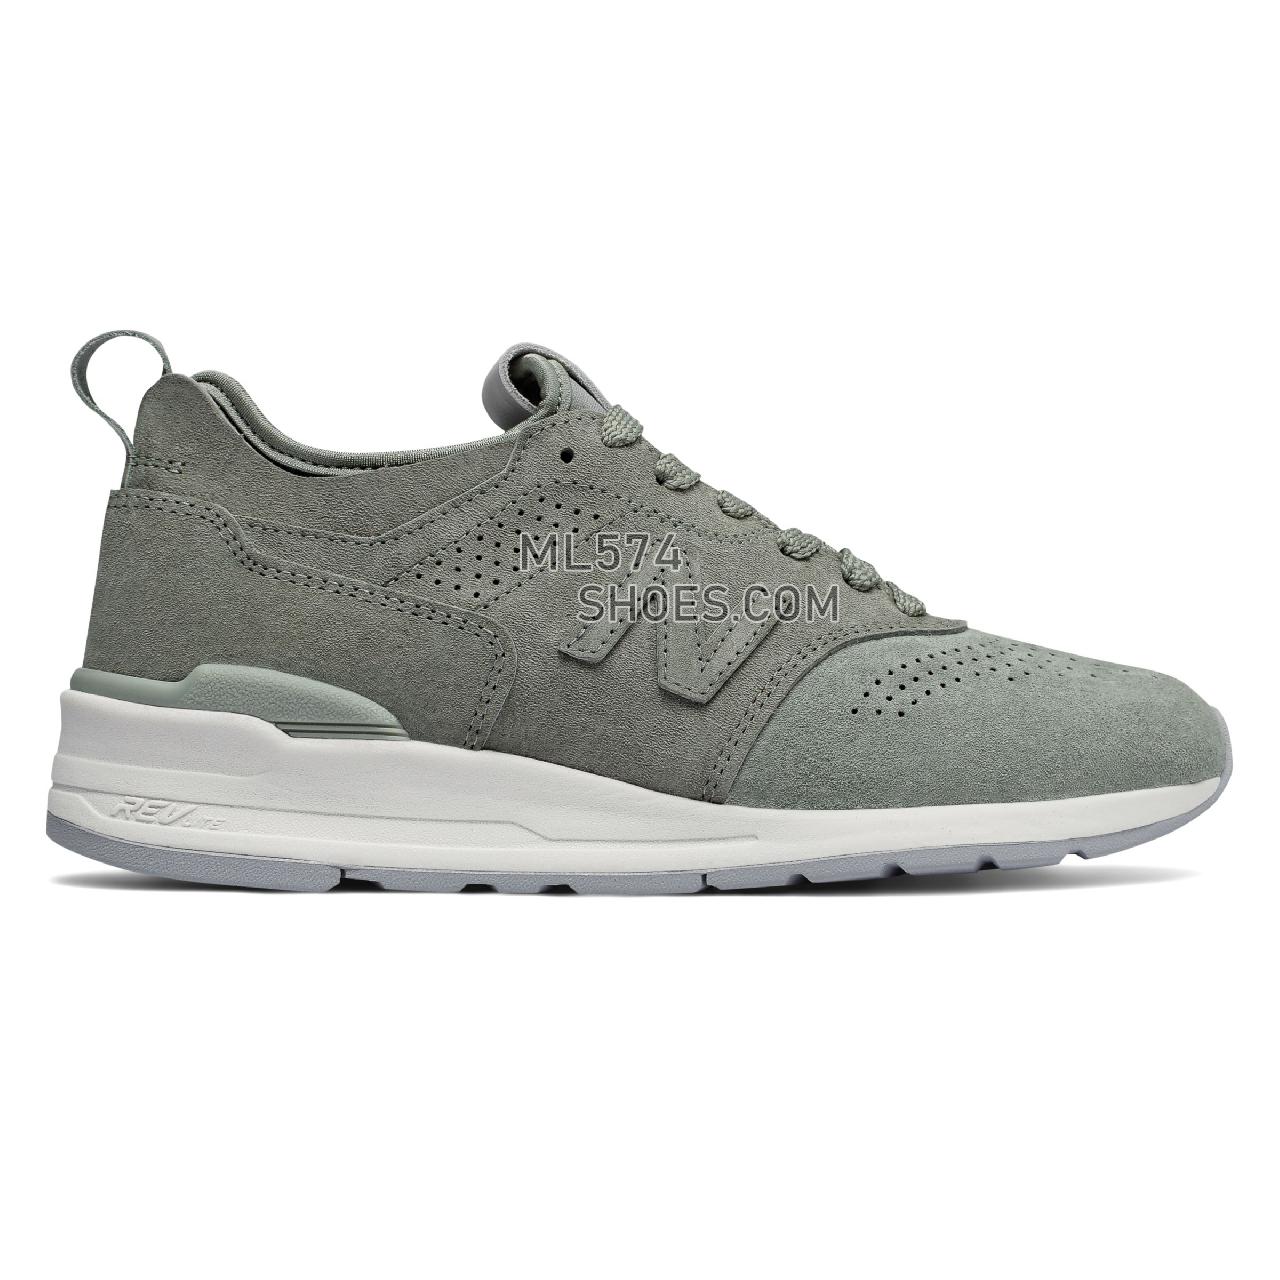 New Balance 997 Made in US Color Spectrum - Men's 997 - Classic Silver Mint - M997DT2